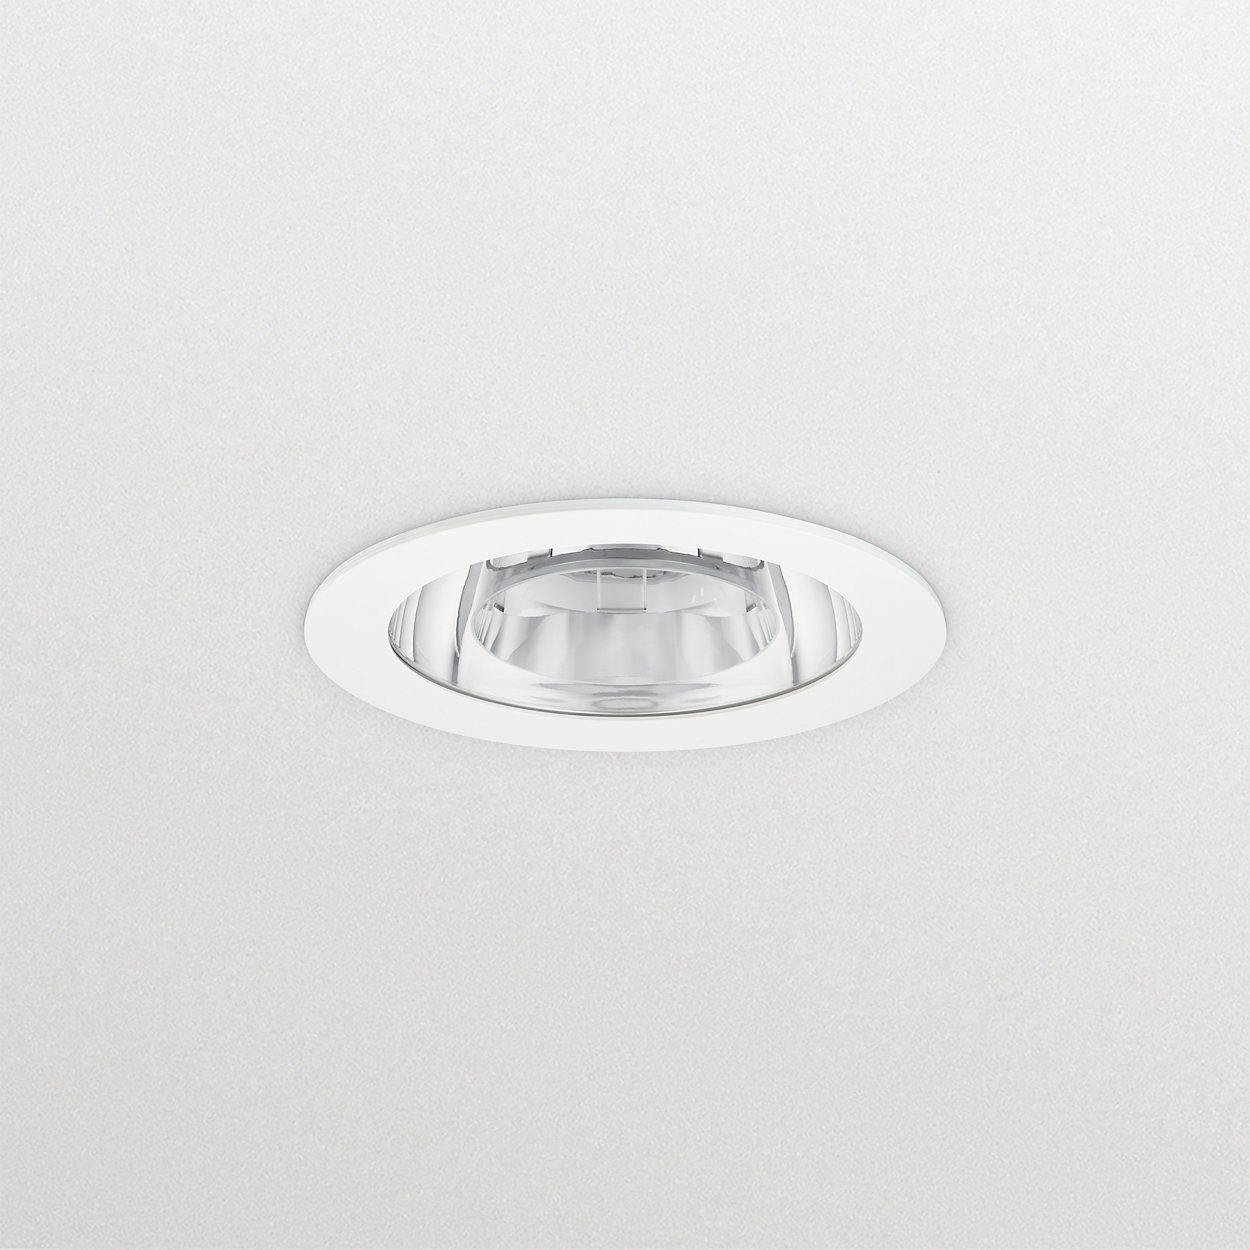 GreenSpace 2 downlight – high-efficiency sustainable LED solution